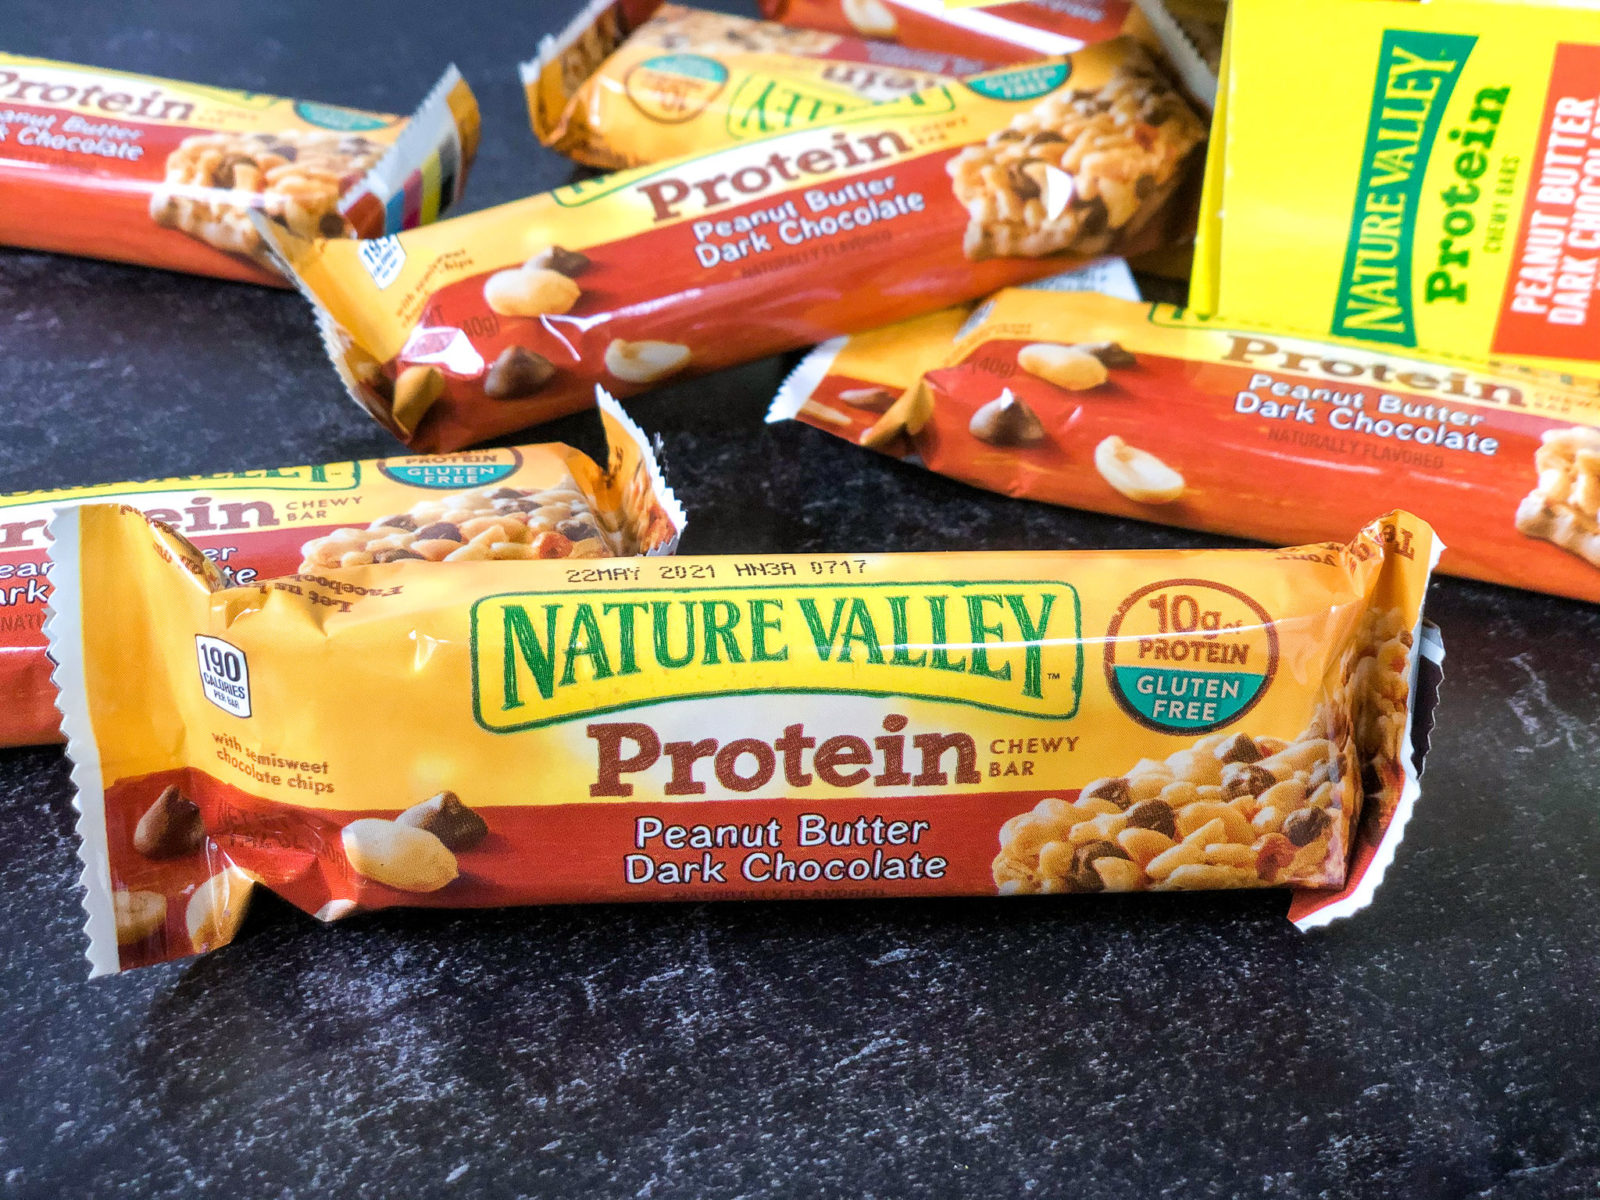 Nature Valley Protein Bars As Low As $2.49 At Kroger (Regular Price $5.29)